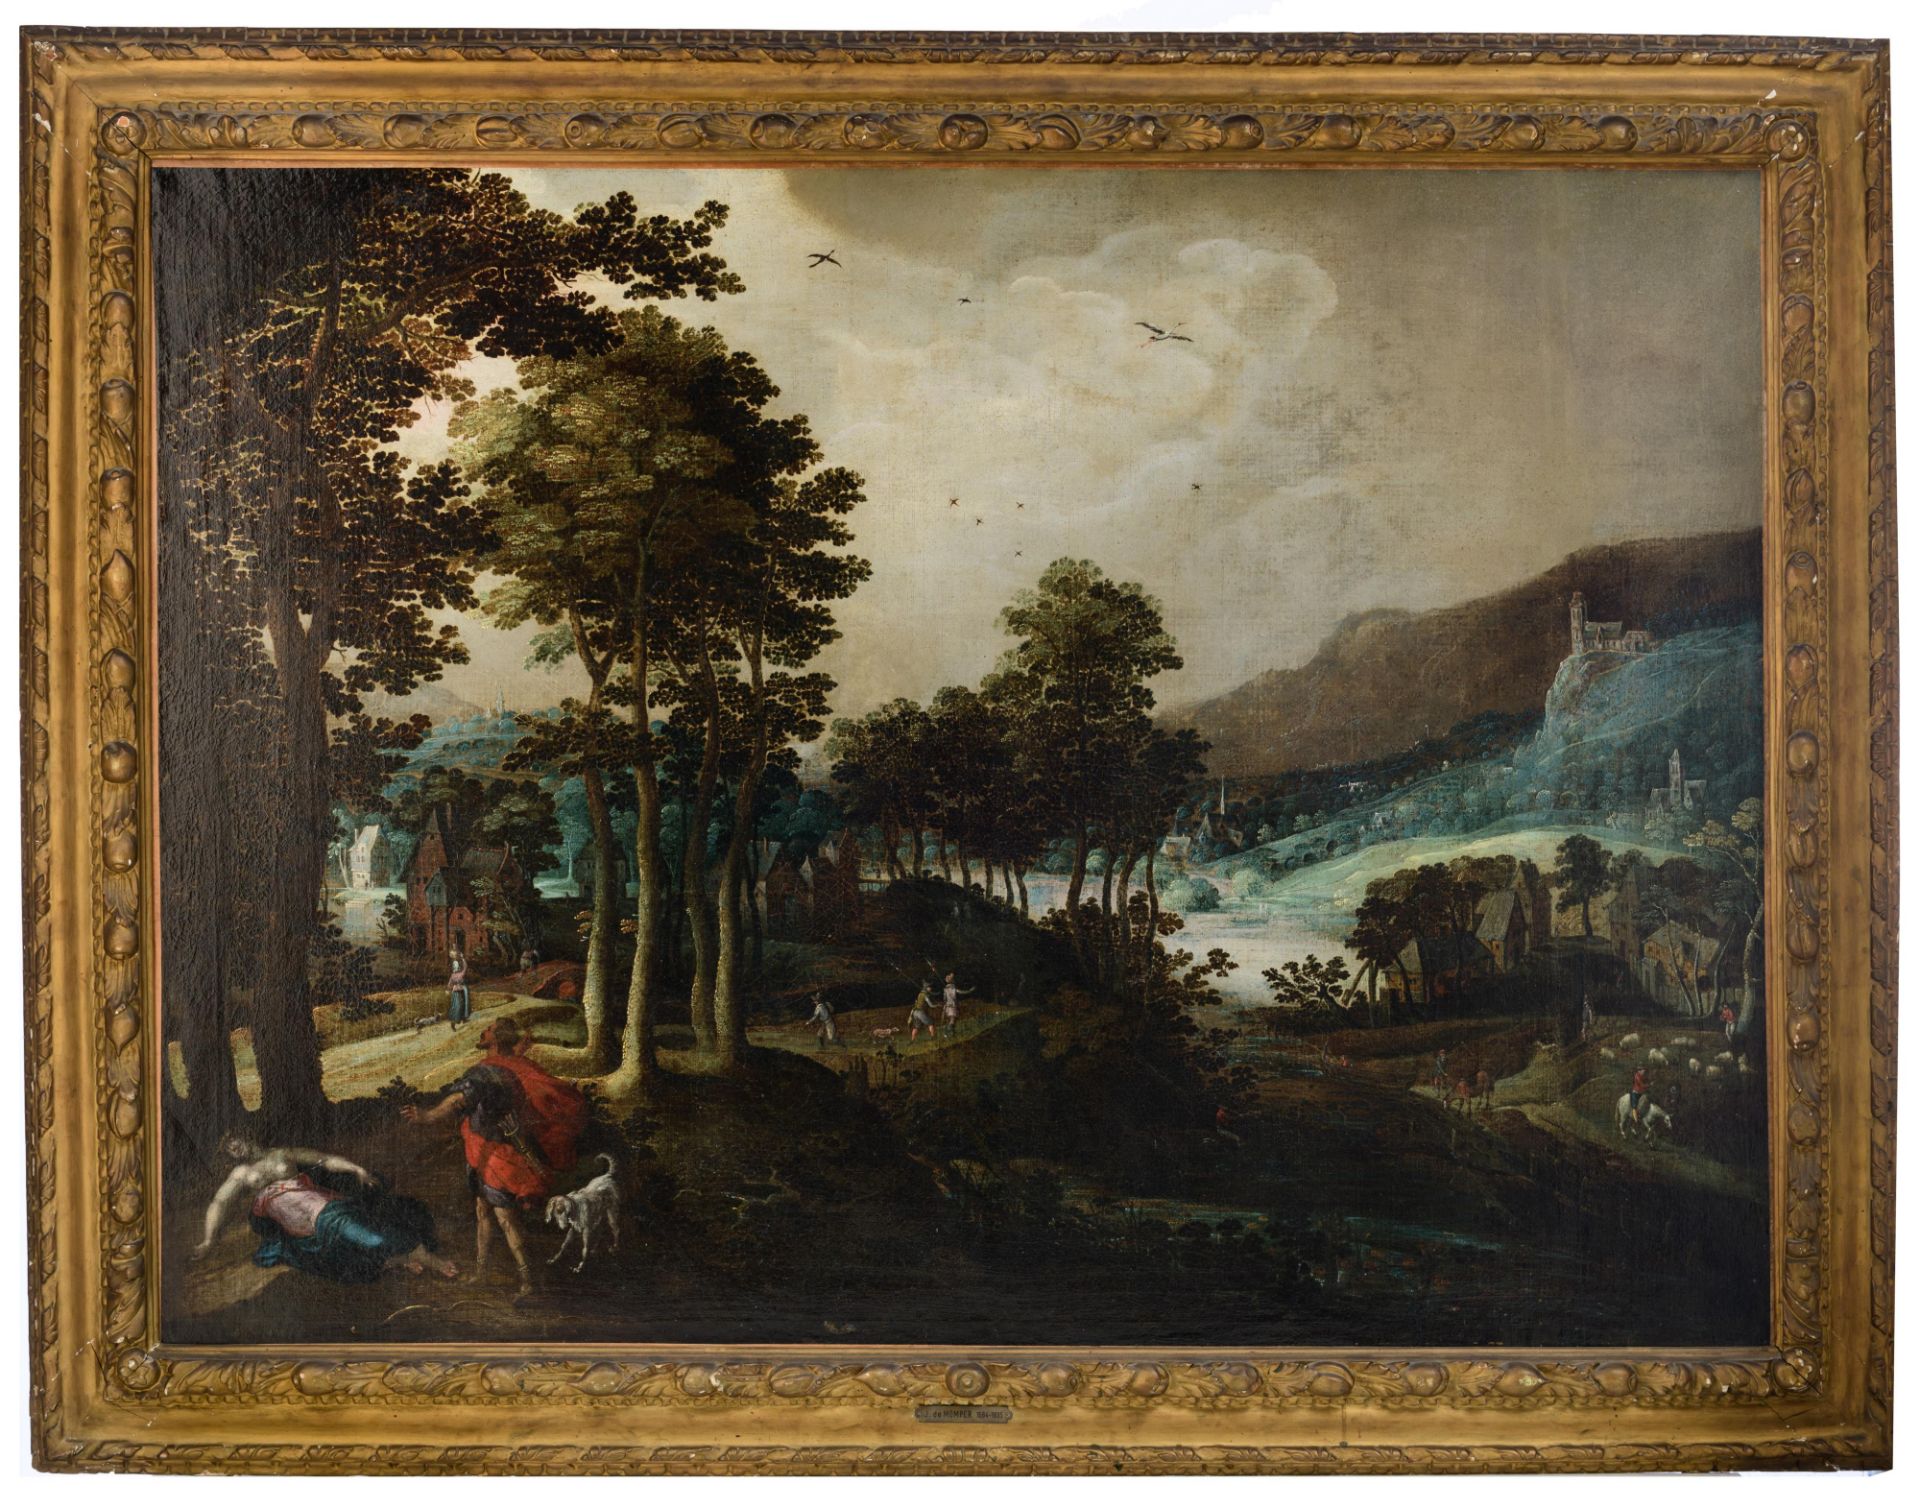 No visible signature, Cephalus and Procris in a landscape, the Southern Netherlands, late 16thC - ea - Image 2 of 11